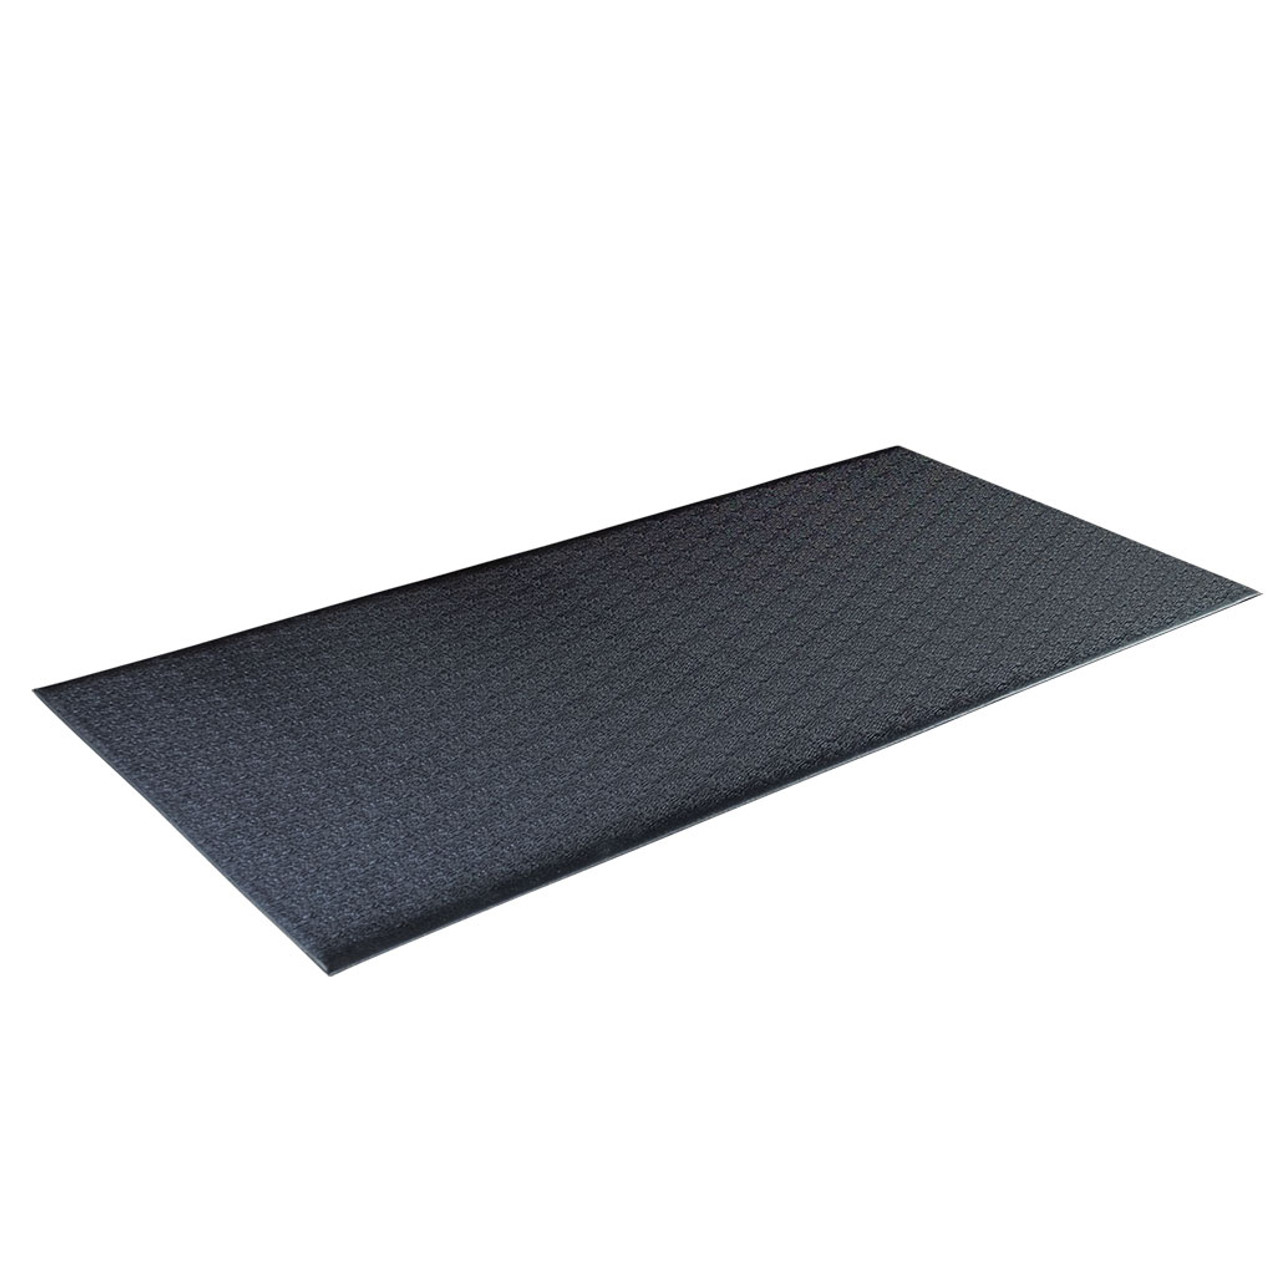 Body-Solid Heavy Duty Rubber Floor Mat (RF546) for Use on Carpet, Hardwood  Floors, Concrete & More - Perfect for Treadmills, Bikes, Yoga & Other Home